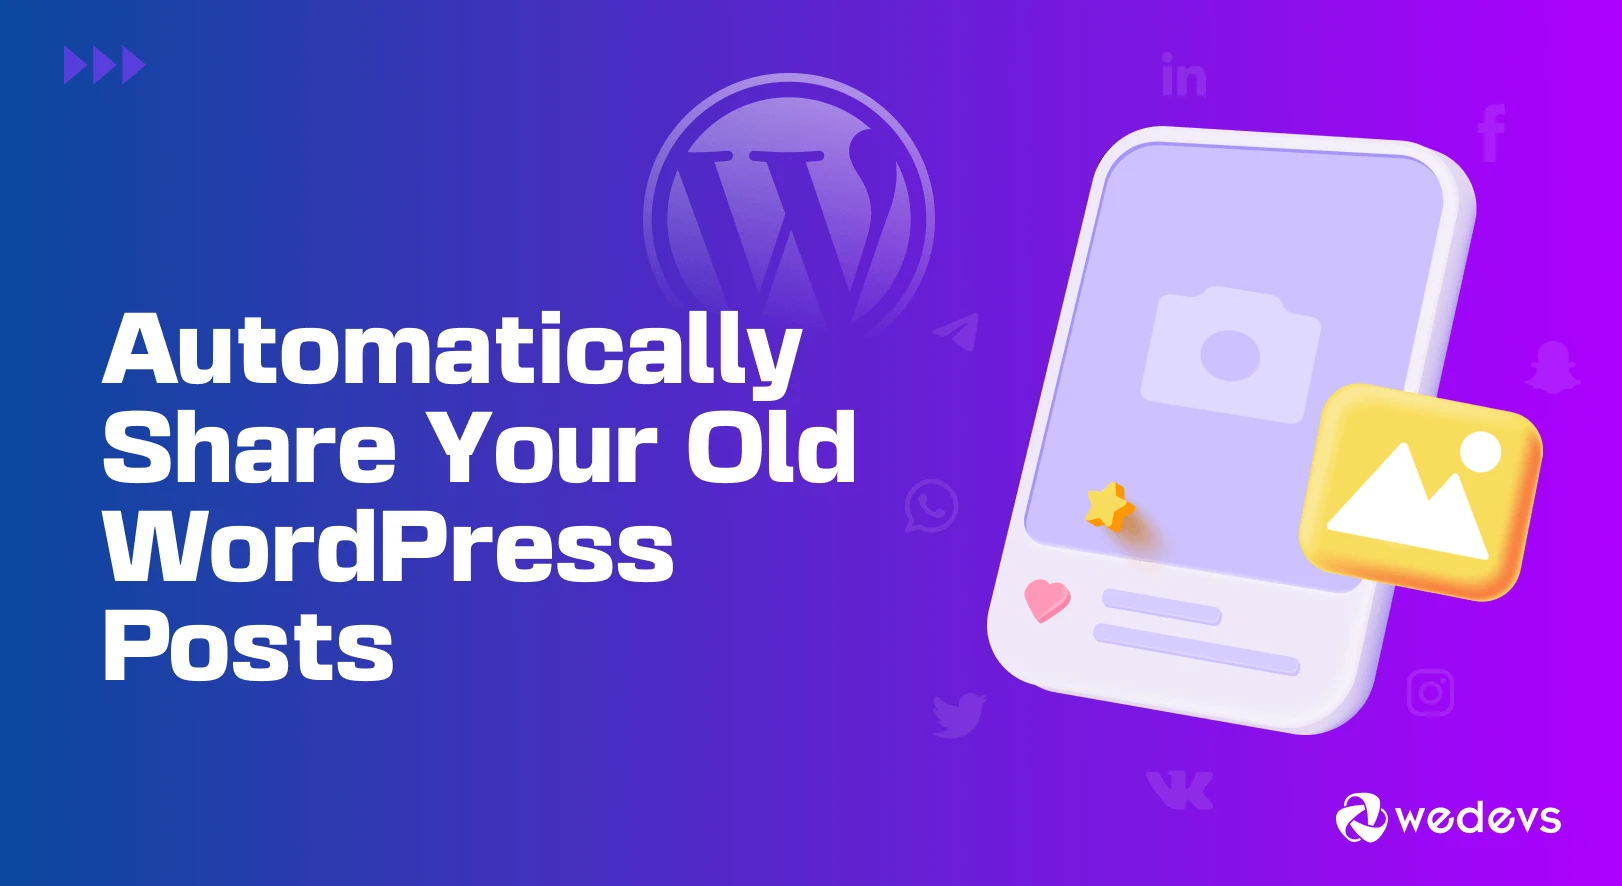 How to Automatically Share Your Old WordPress Posts on Social Media